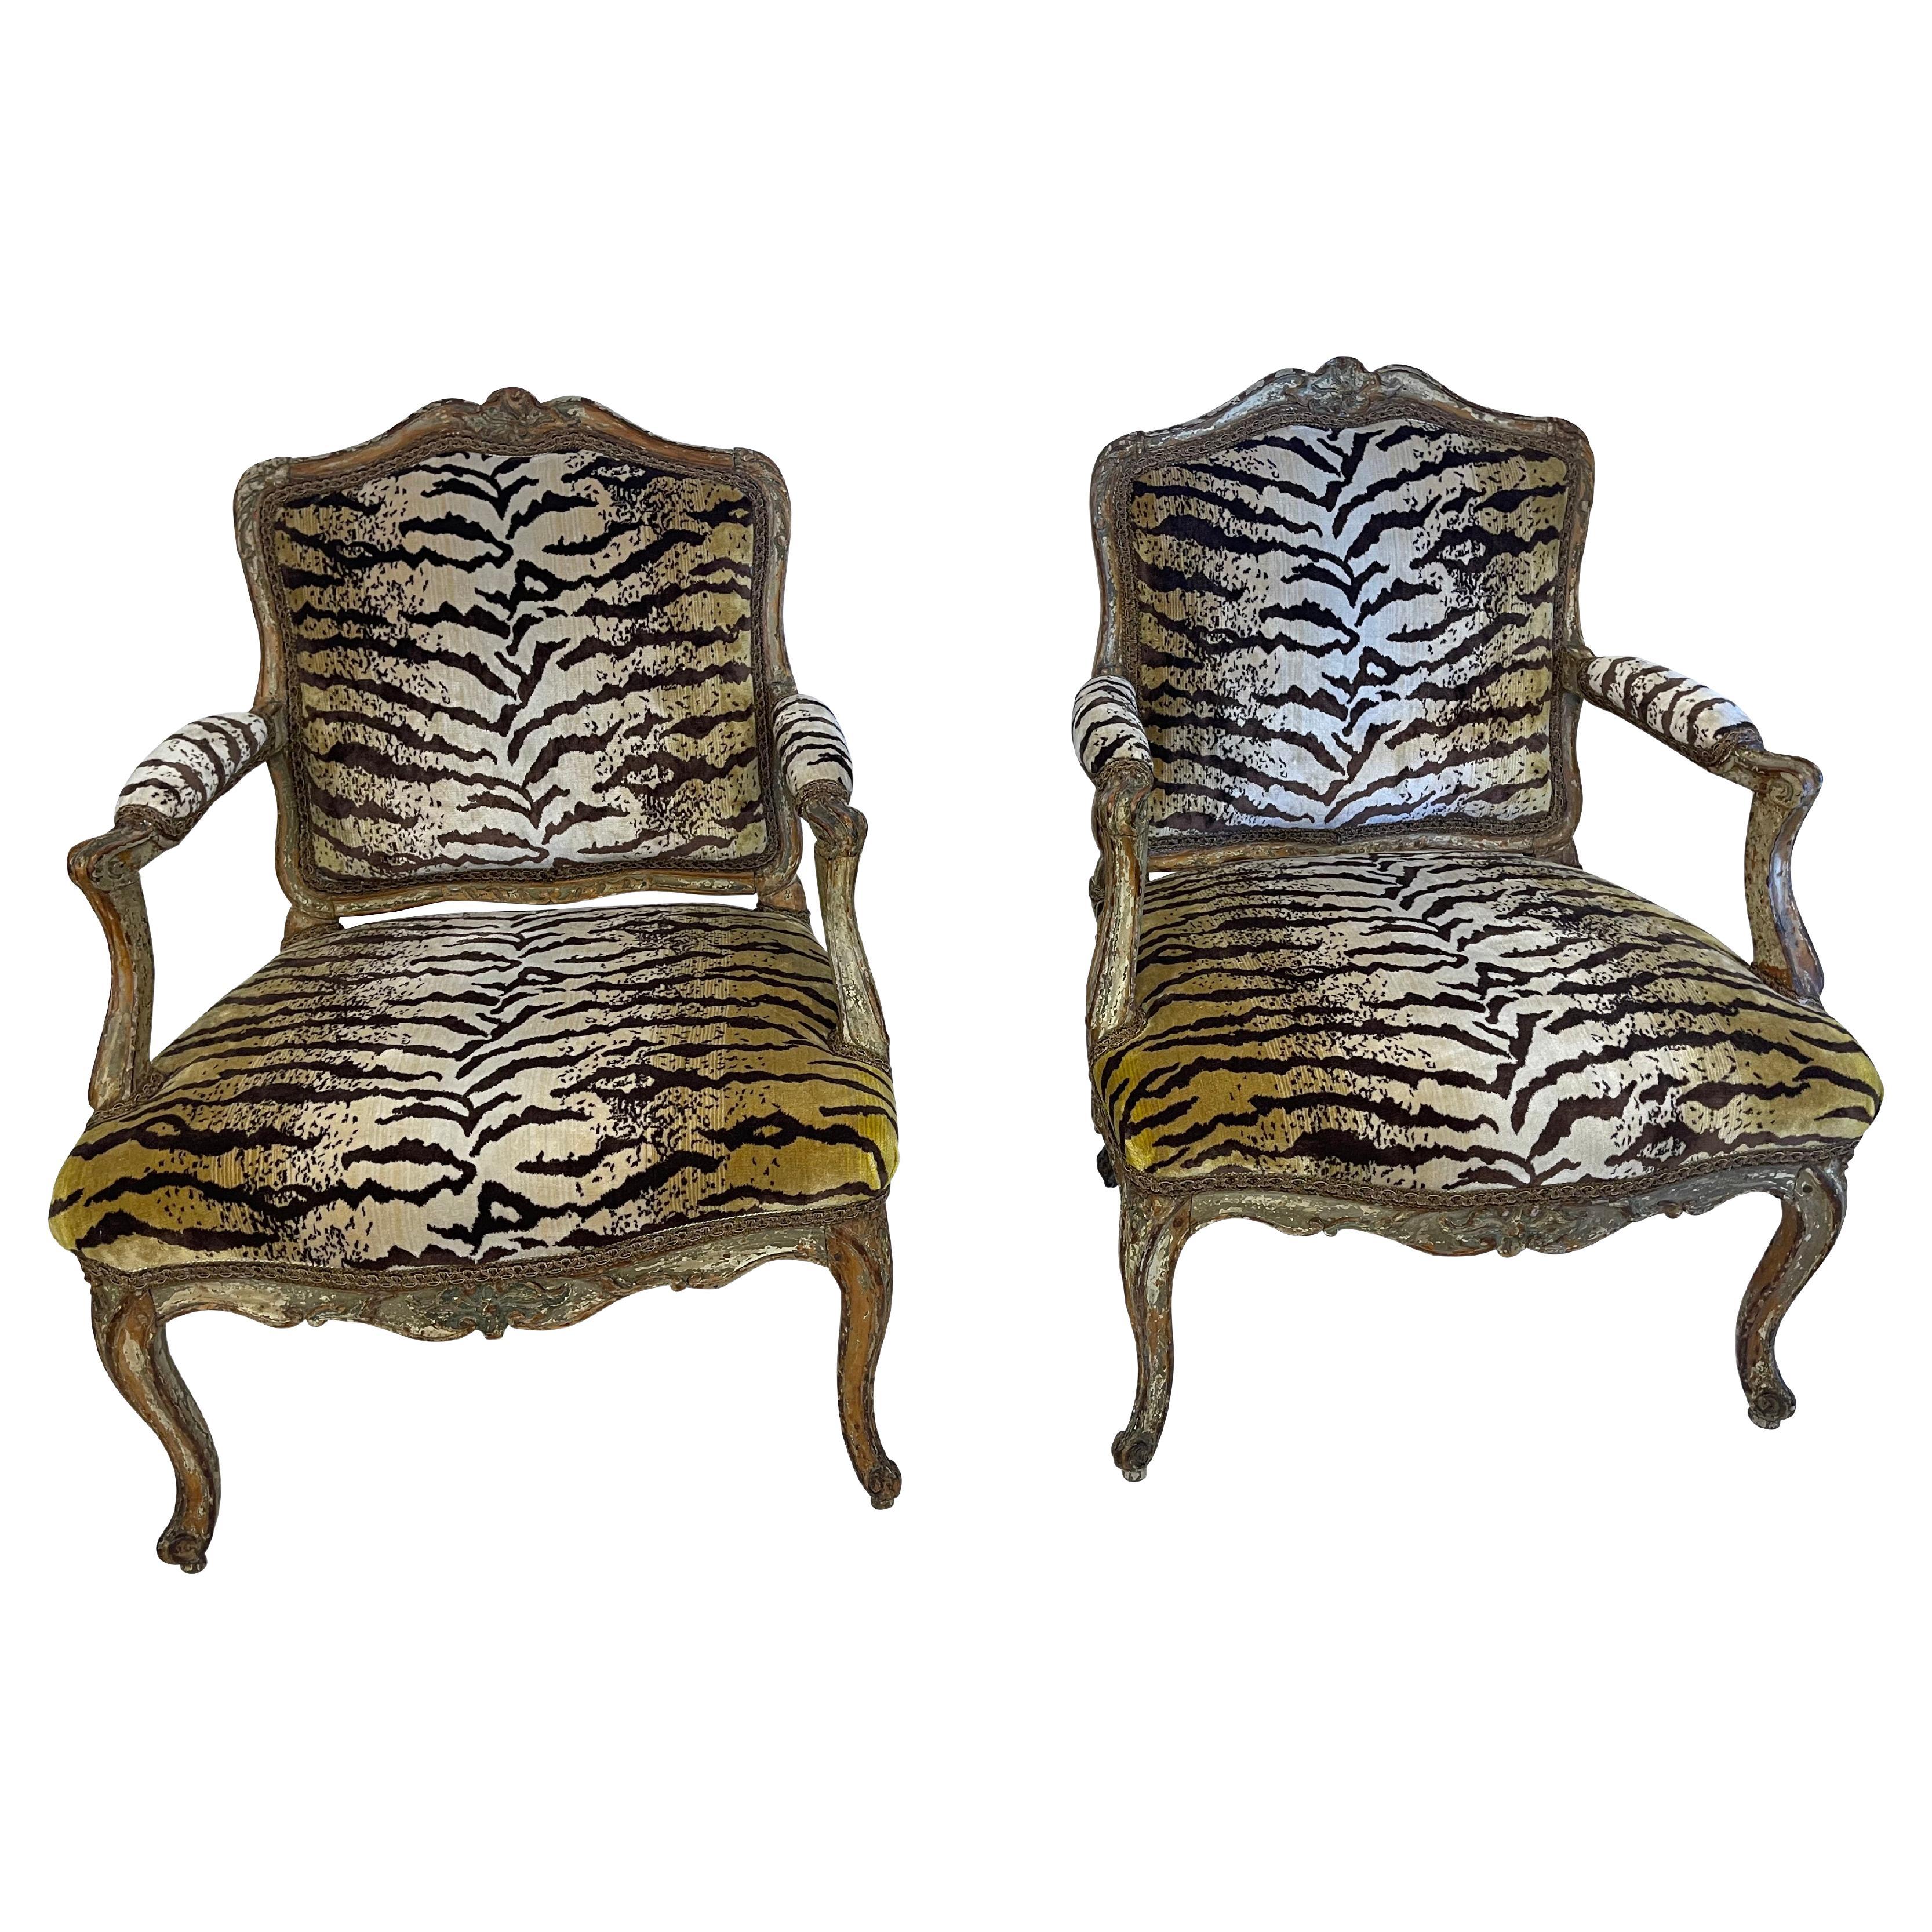 Pair of Period French carved armchairs withScalamandre